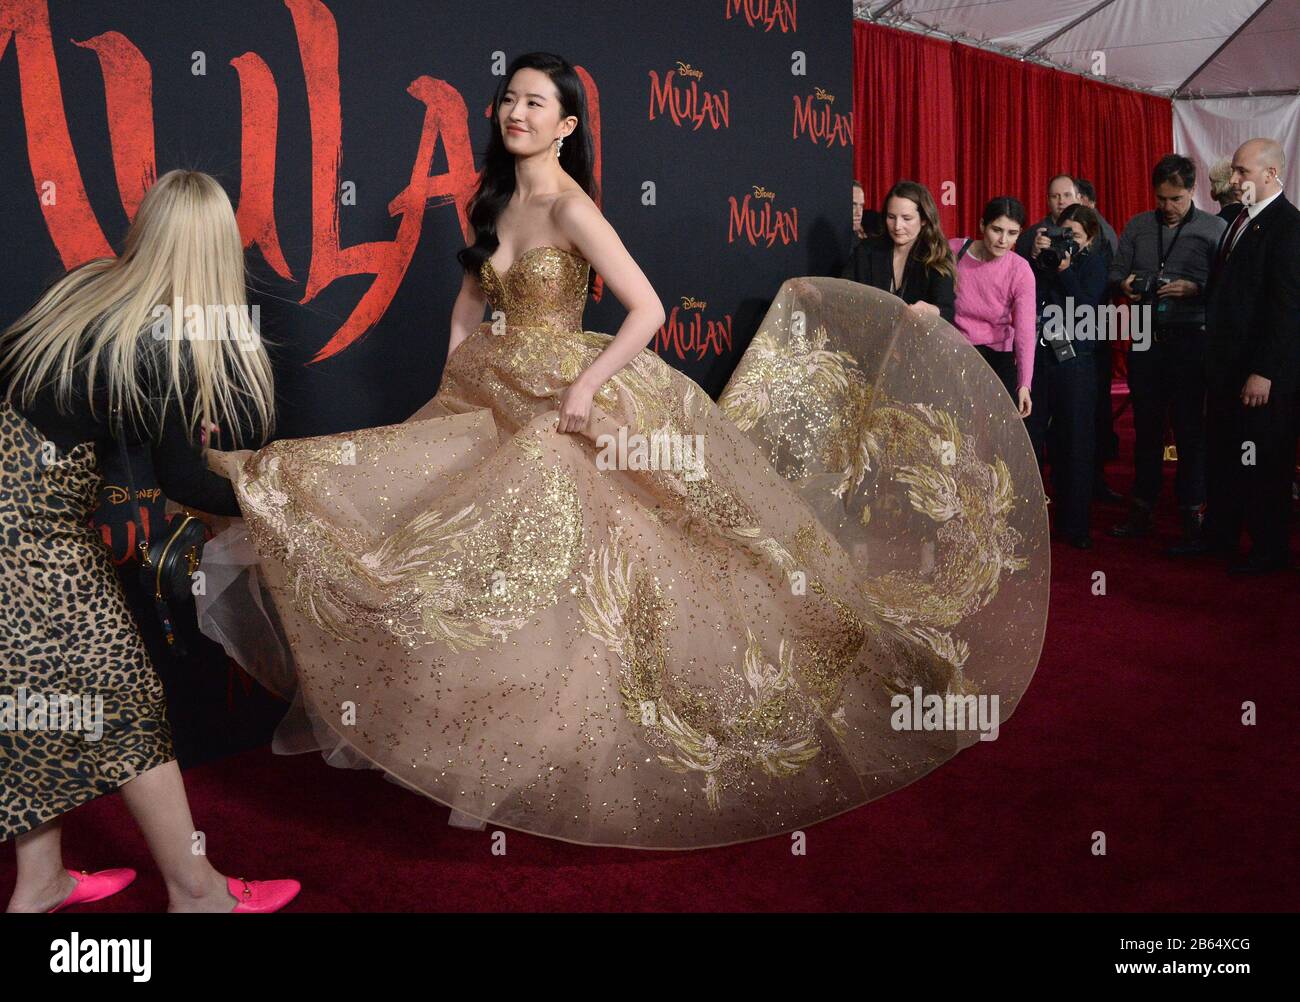 Los Angeles, United States. 9th Mar, 2020. Cast member Yifei Liu attends the premiere of the motion picture adventure drama 'Mulan' at the Dolby Theatre in the Hollywood section of Los Angeles on Monday, March 9, 2020. Storyline: A young Chinese maiden disguises herself as a male warrior in order to save her father. Photo by Jim Ruymen/UPI Credit: UPI/Alamy Live News Stock Photo